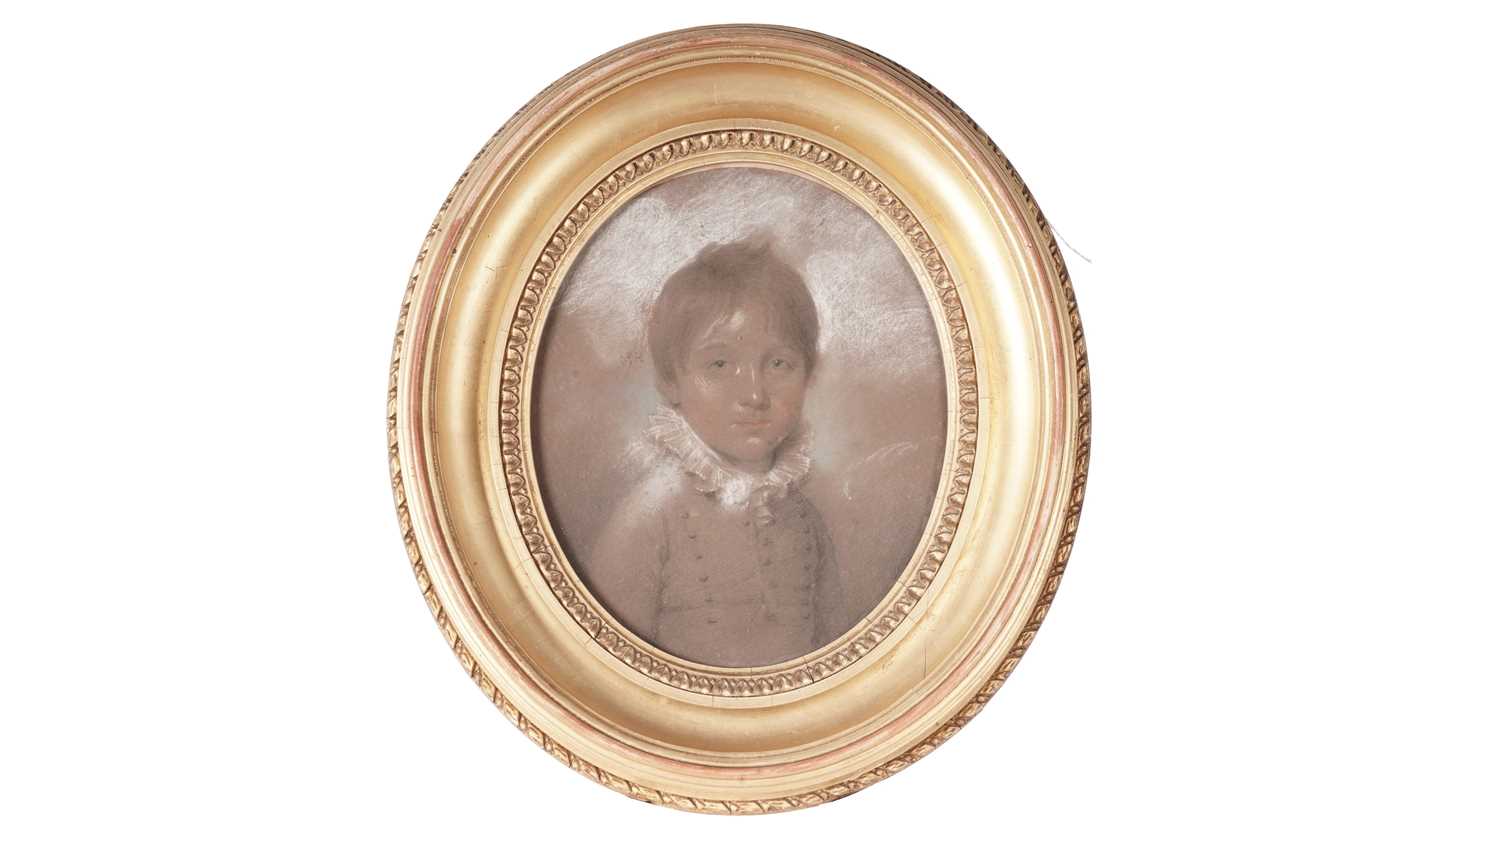 Lot 36 - Late 18th Century British School - Portrait of a Young Boy Called George Richmond | pastel